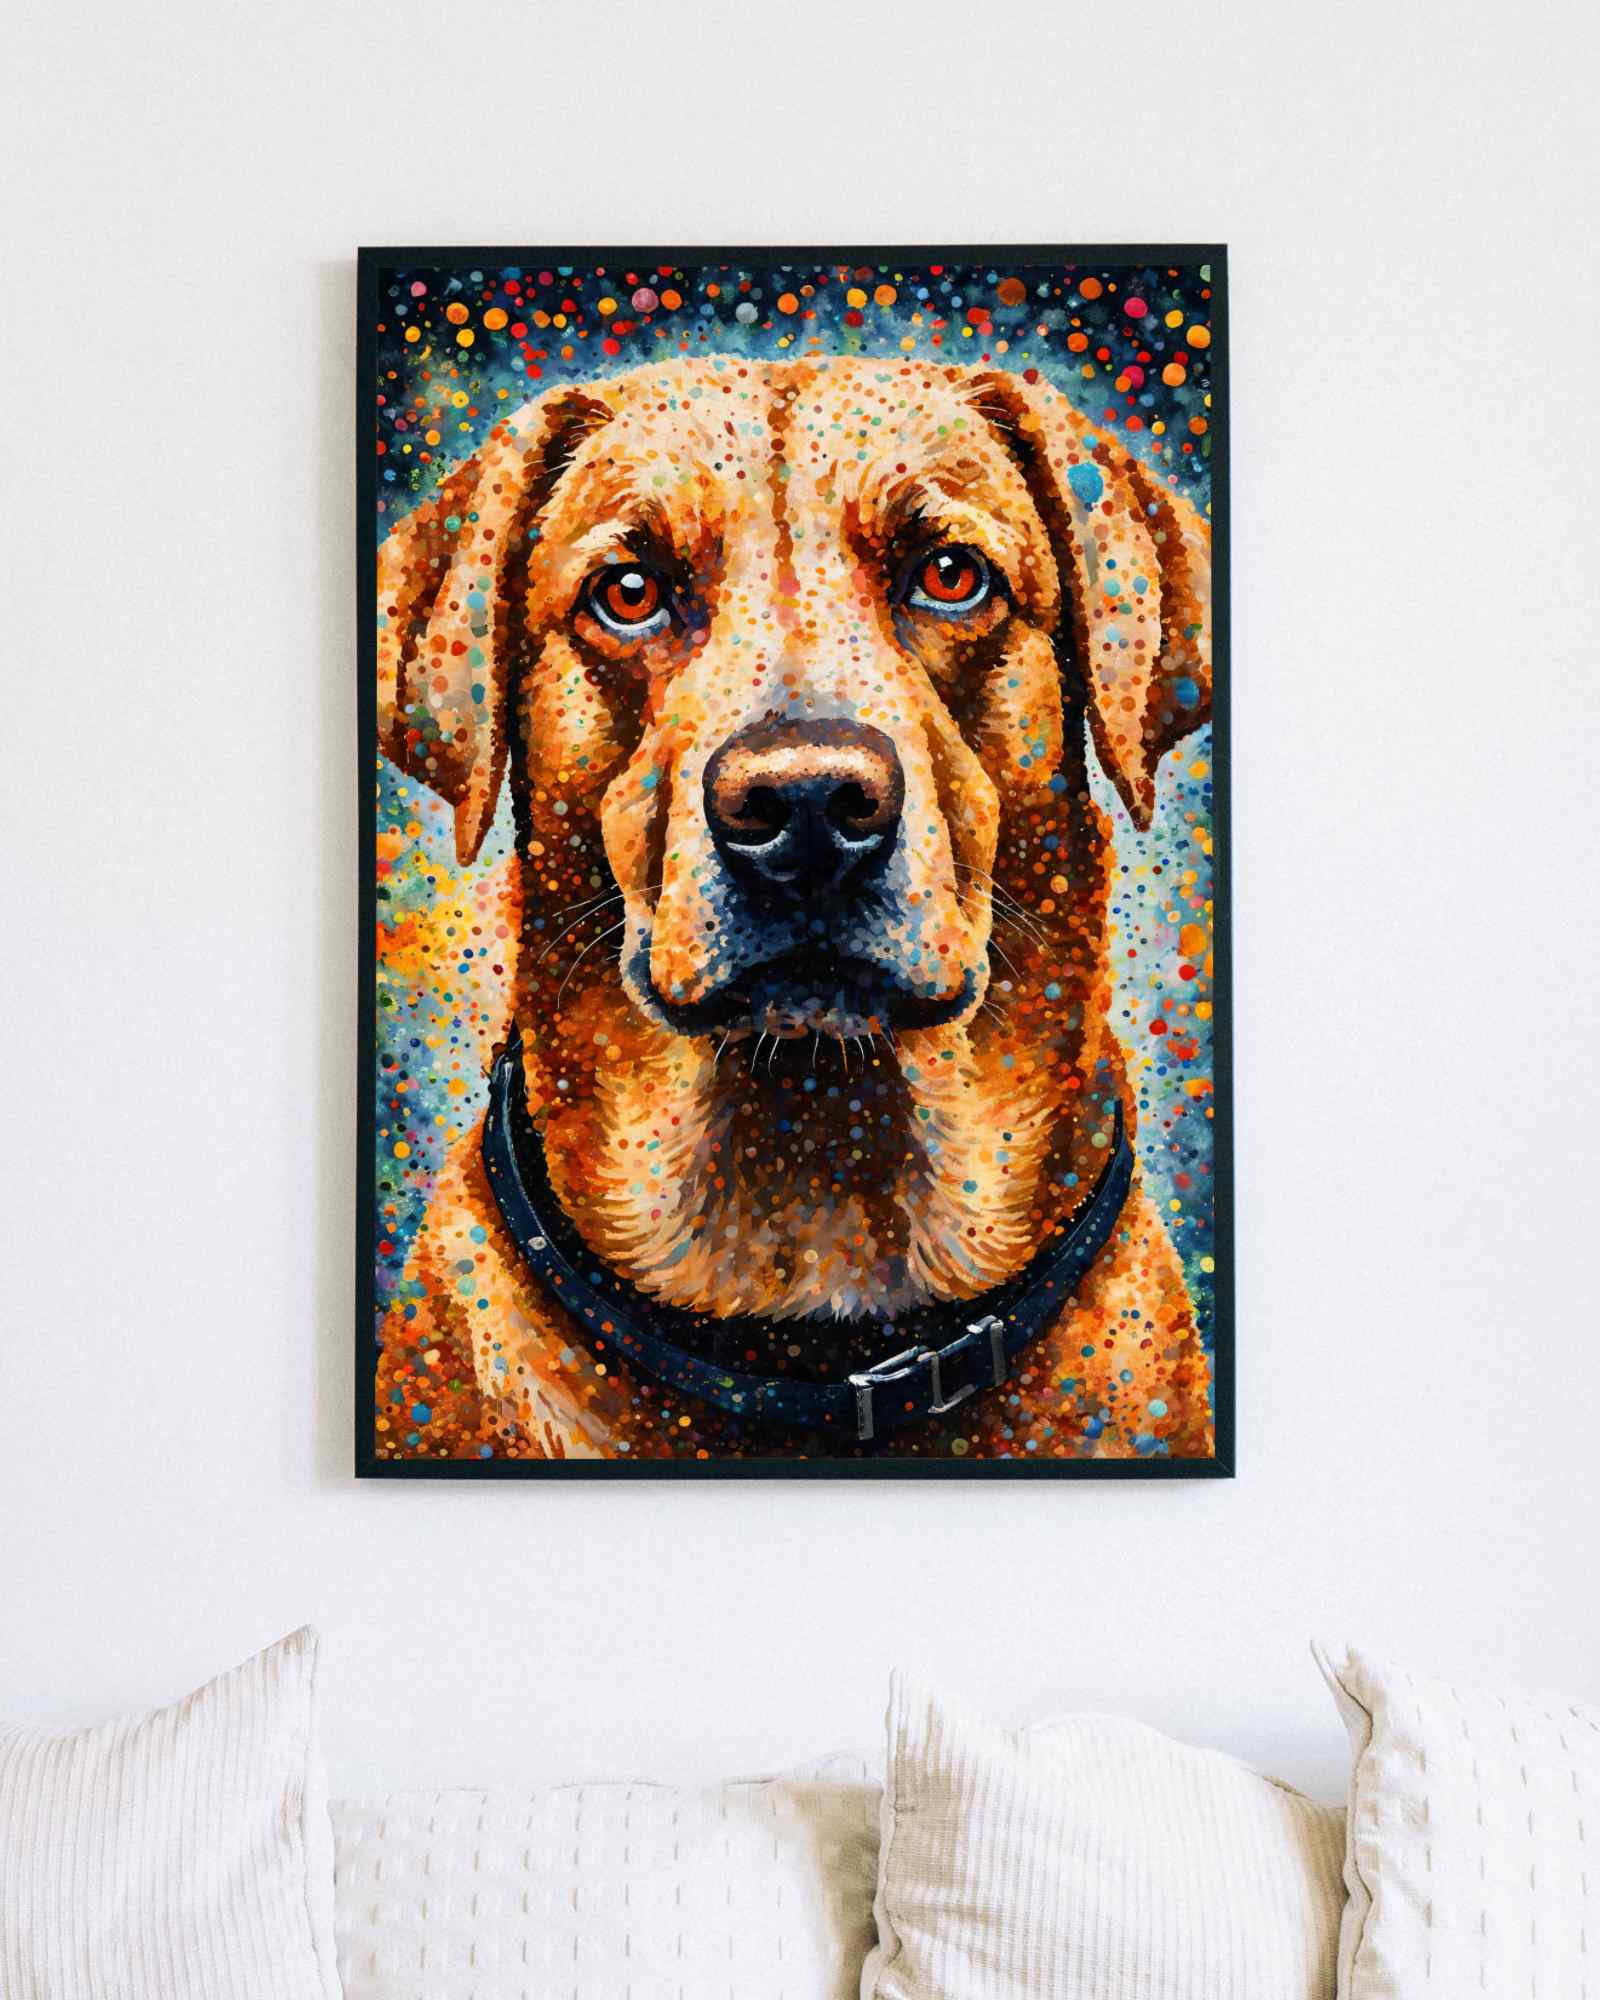 Big puppy - Poster - Ever colorful